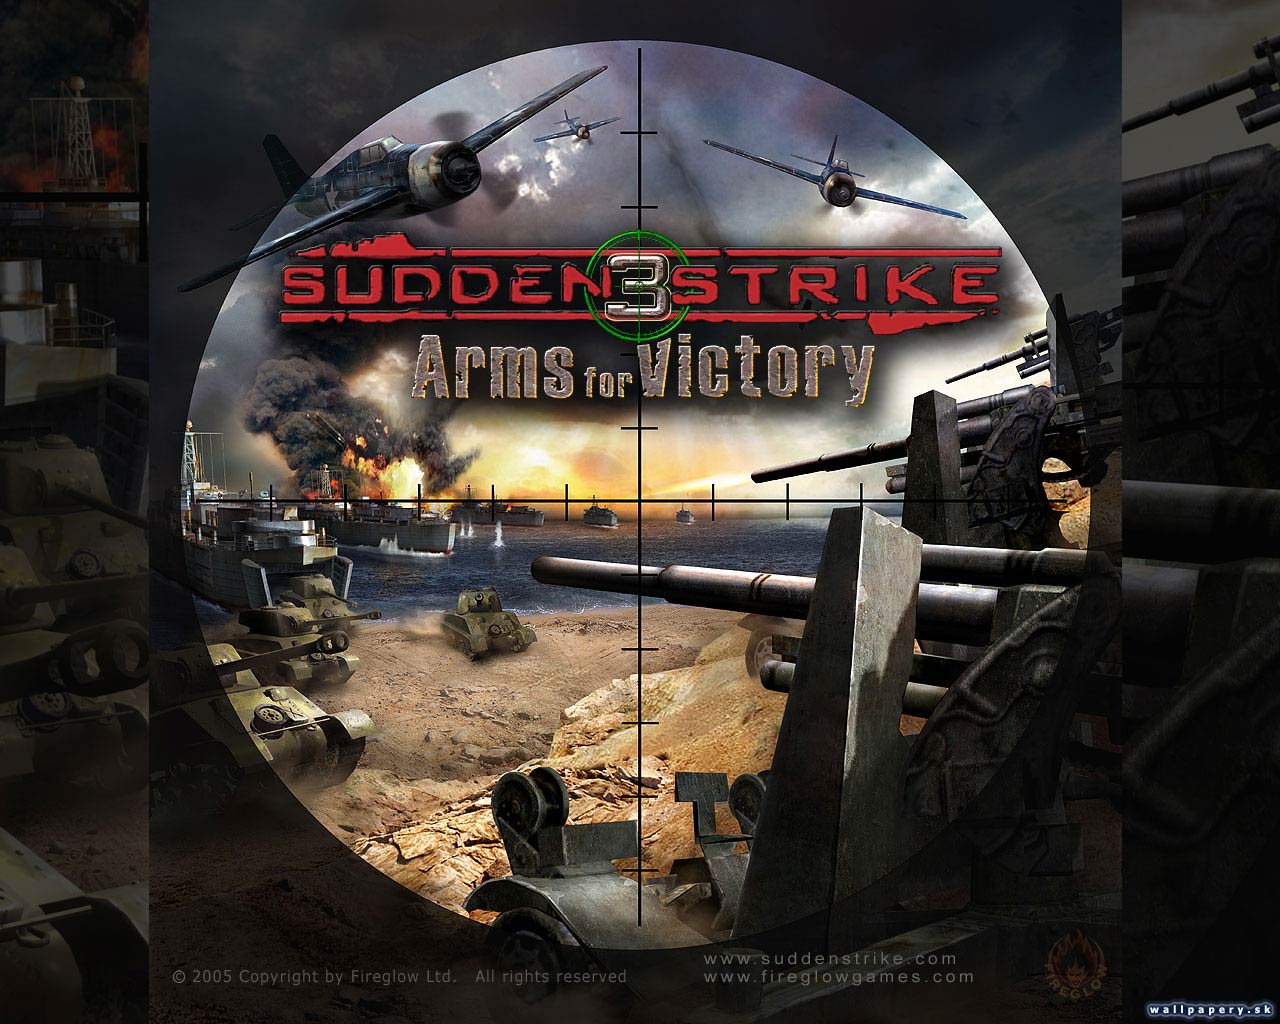 Sudden Strike 3: Arms for Victory - wallpaper 2